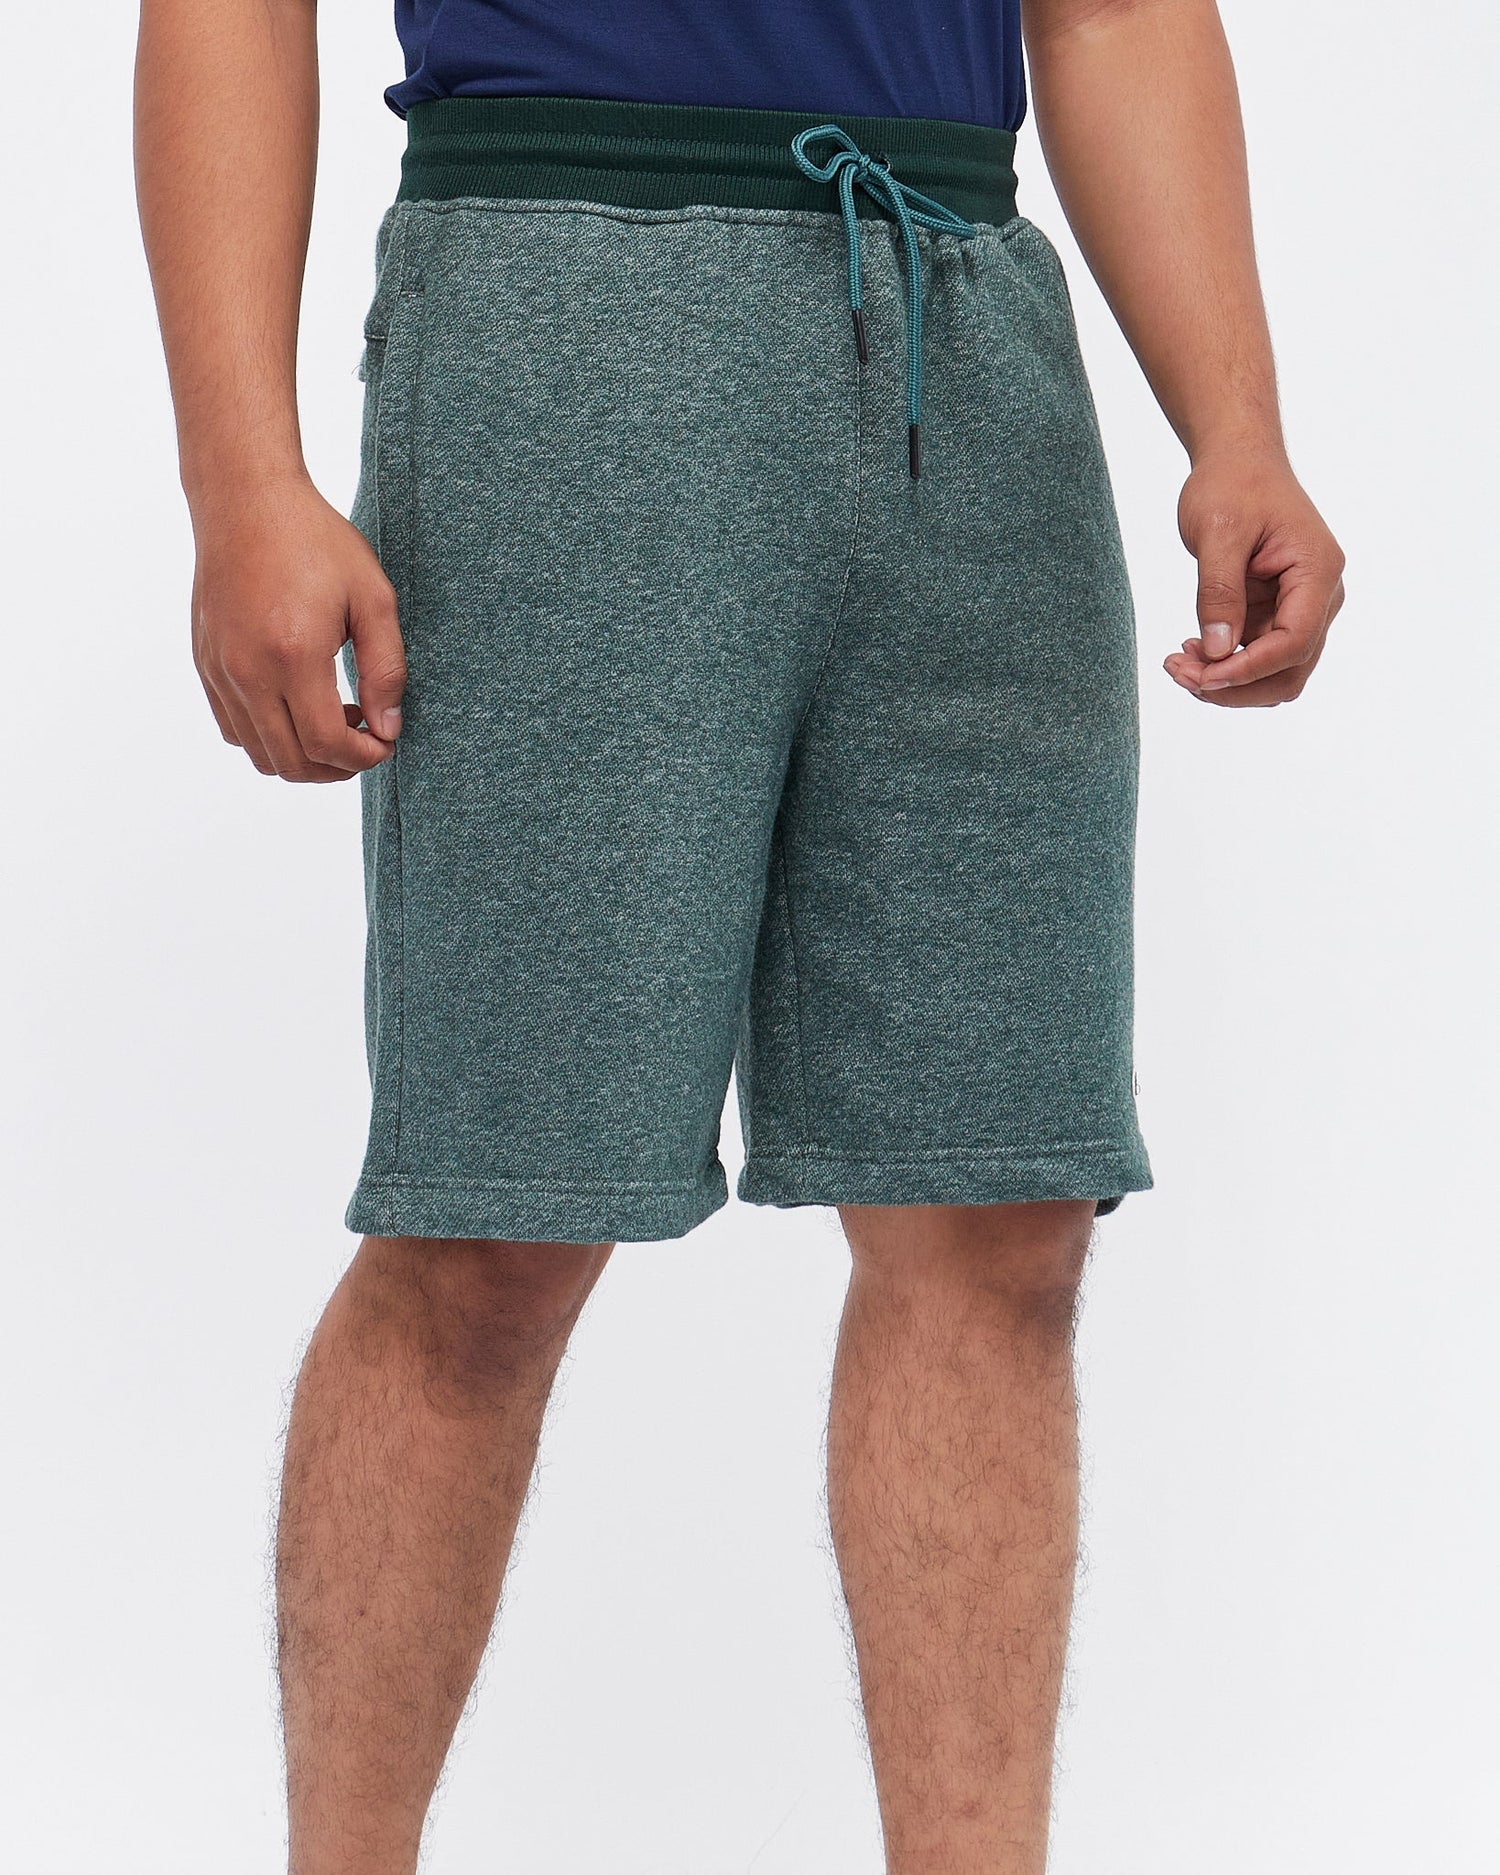 MOI OUTFIT-Elastic Relax Fit Men Short 14.90